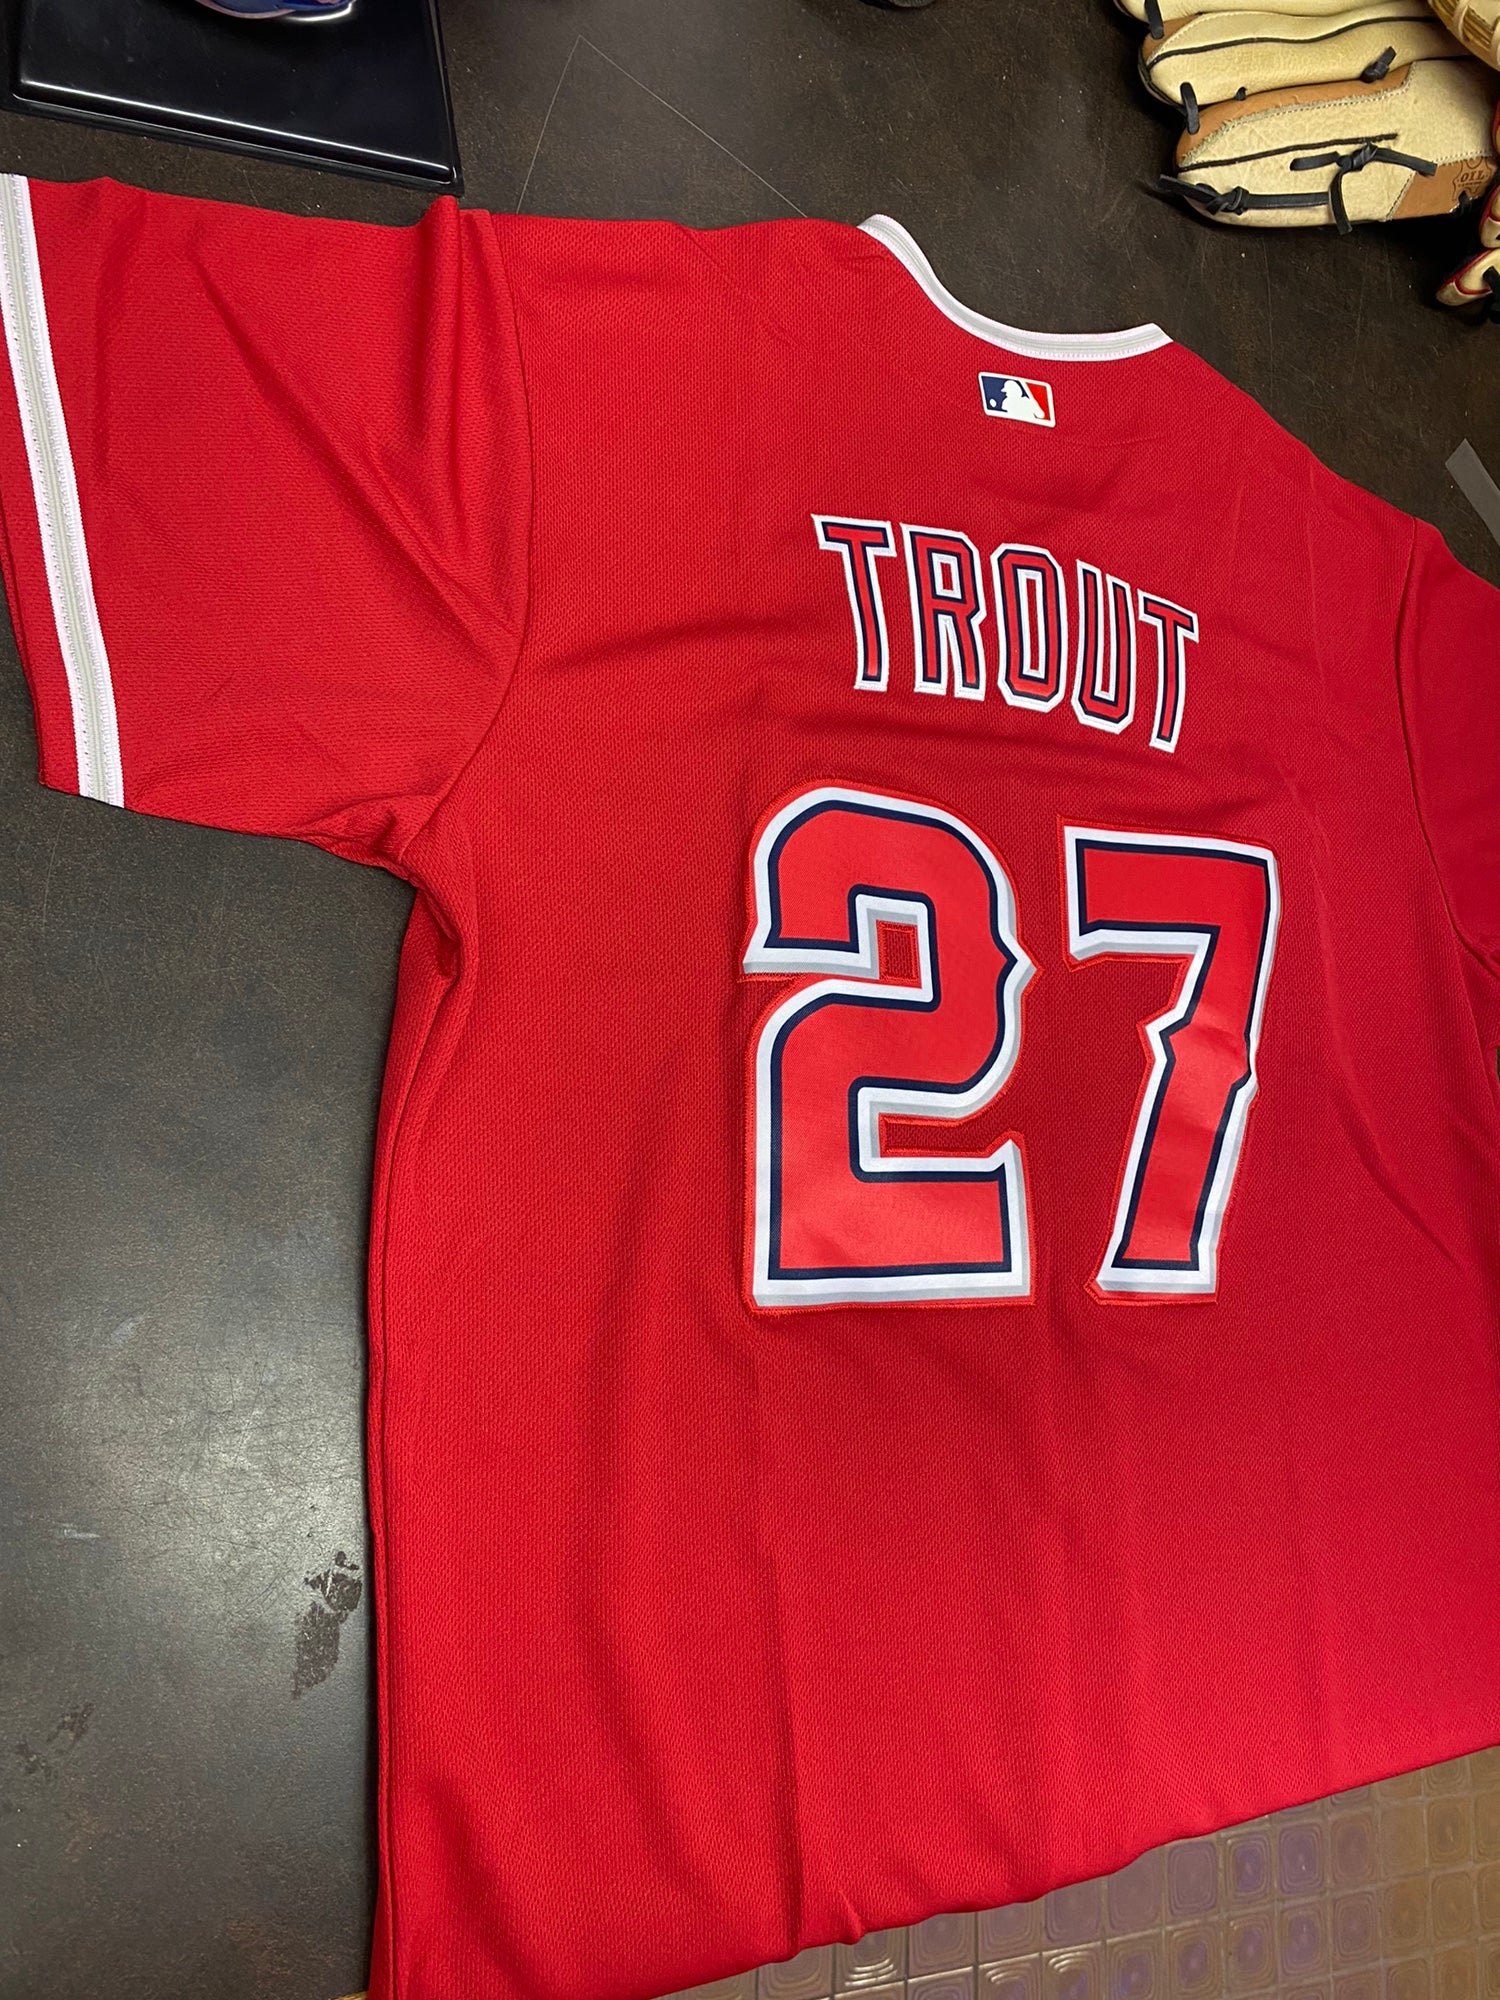 At Auction: MLB Los Angeles Angels Nike #27 Trout Jersey - Mens Large